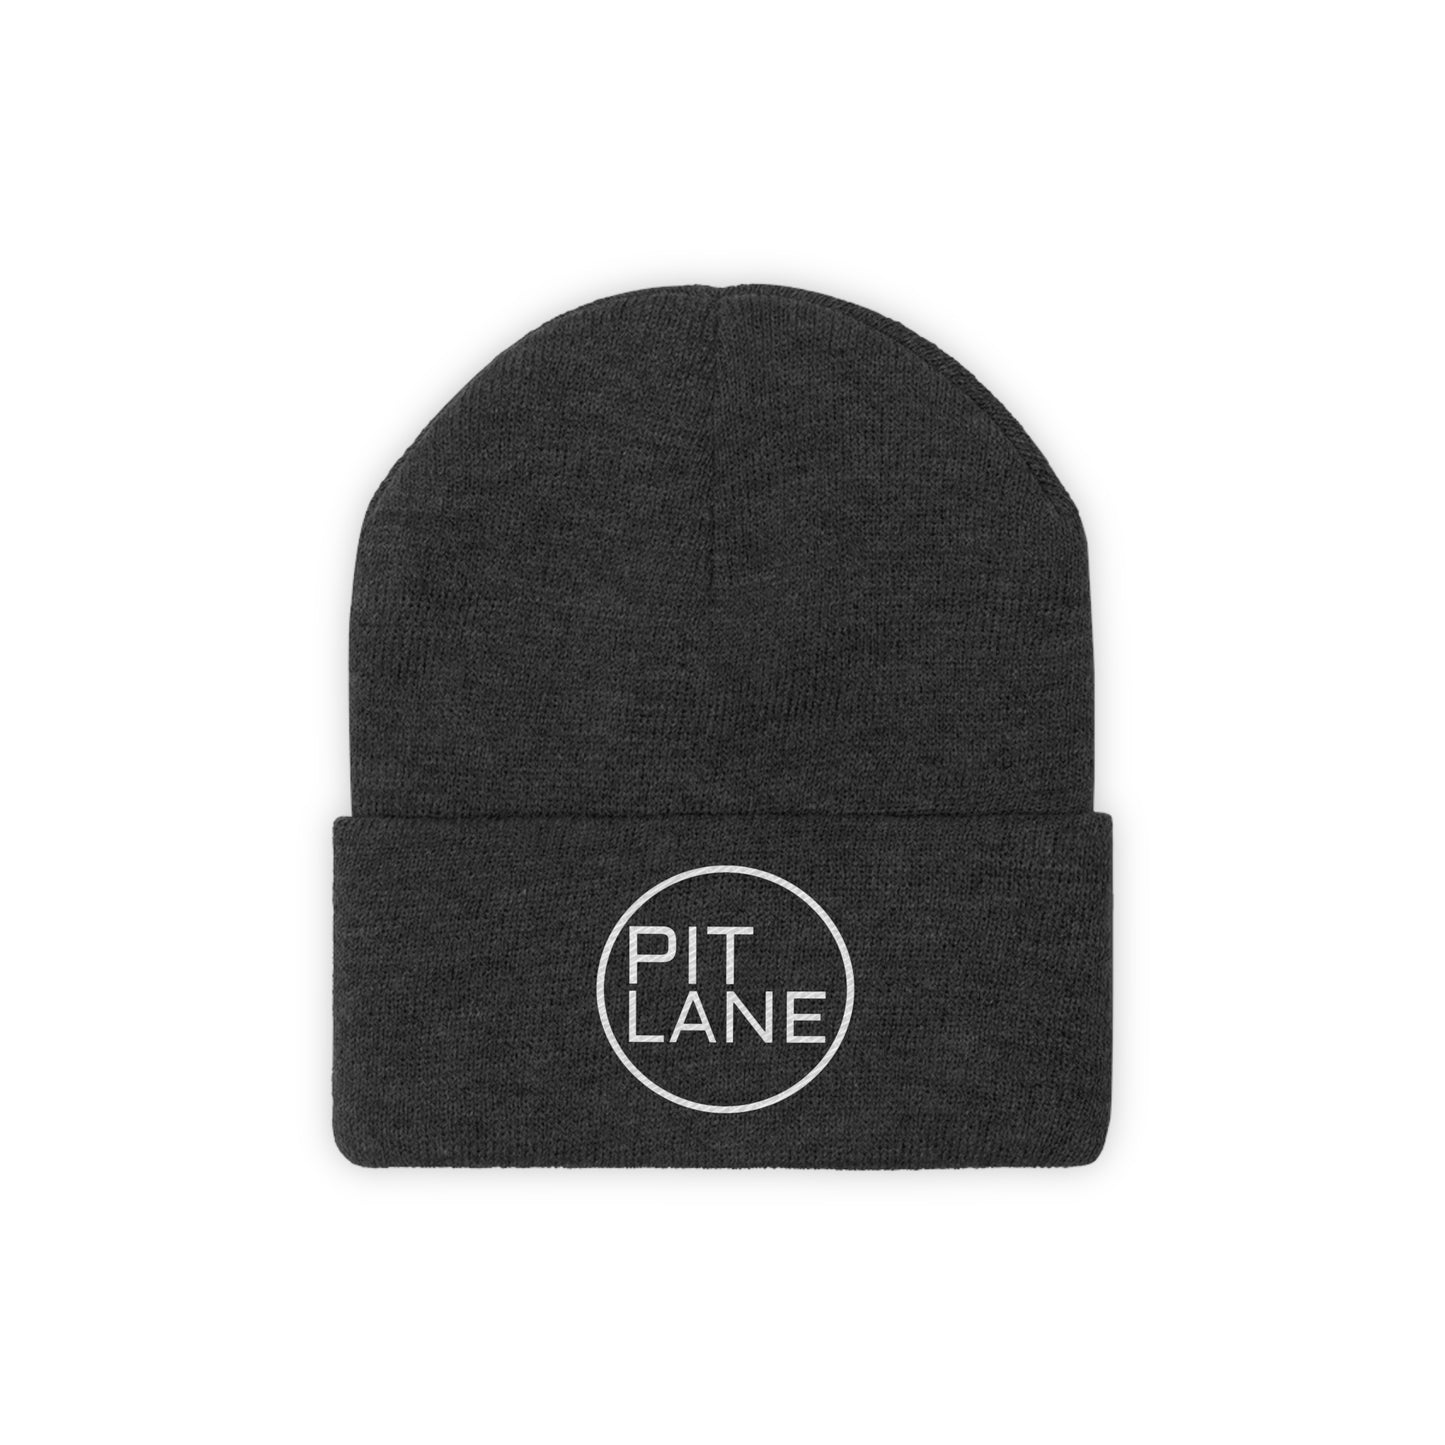 PIT LANE CLOTHING Knit Embroidered 100% Wool Knit Beanie